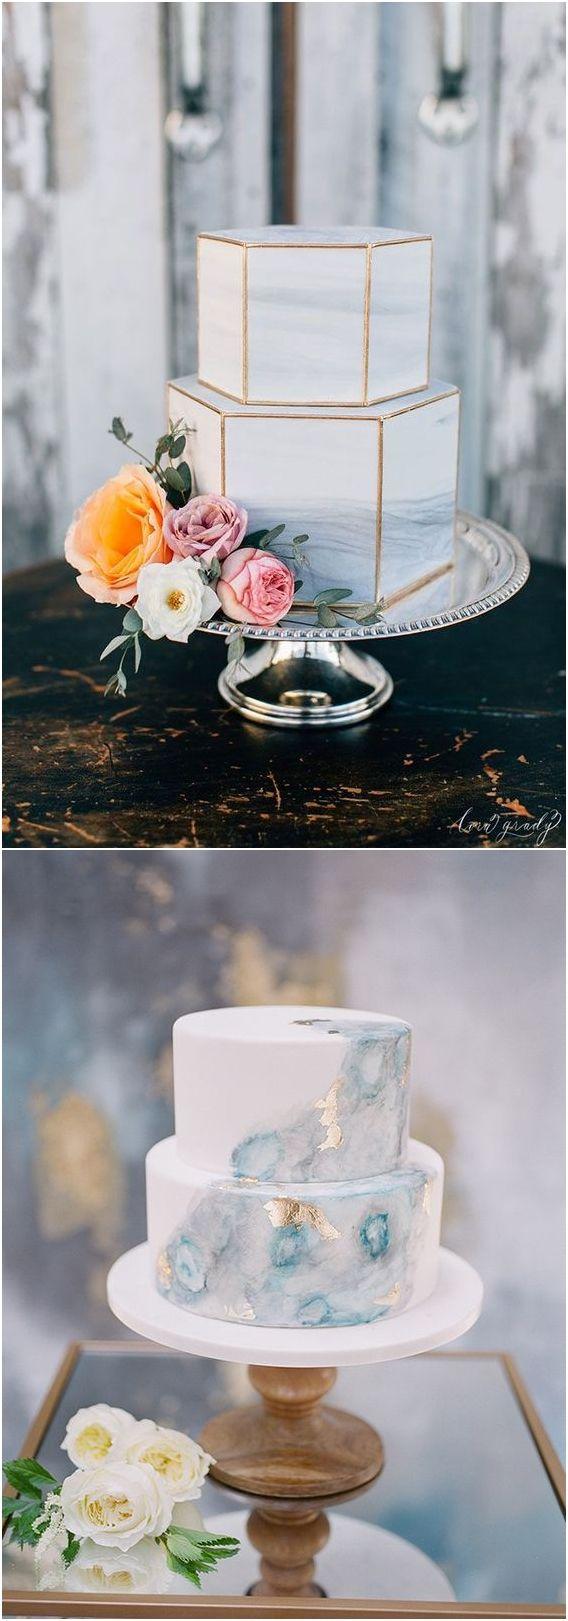 Mariage - Top 5 Wedding Cake Trends In 2018